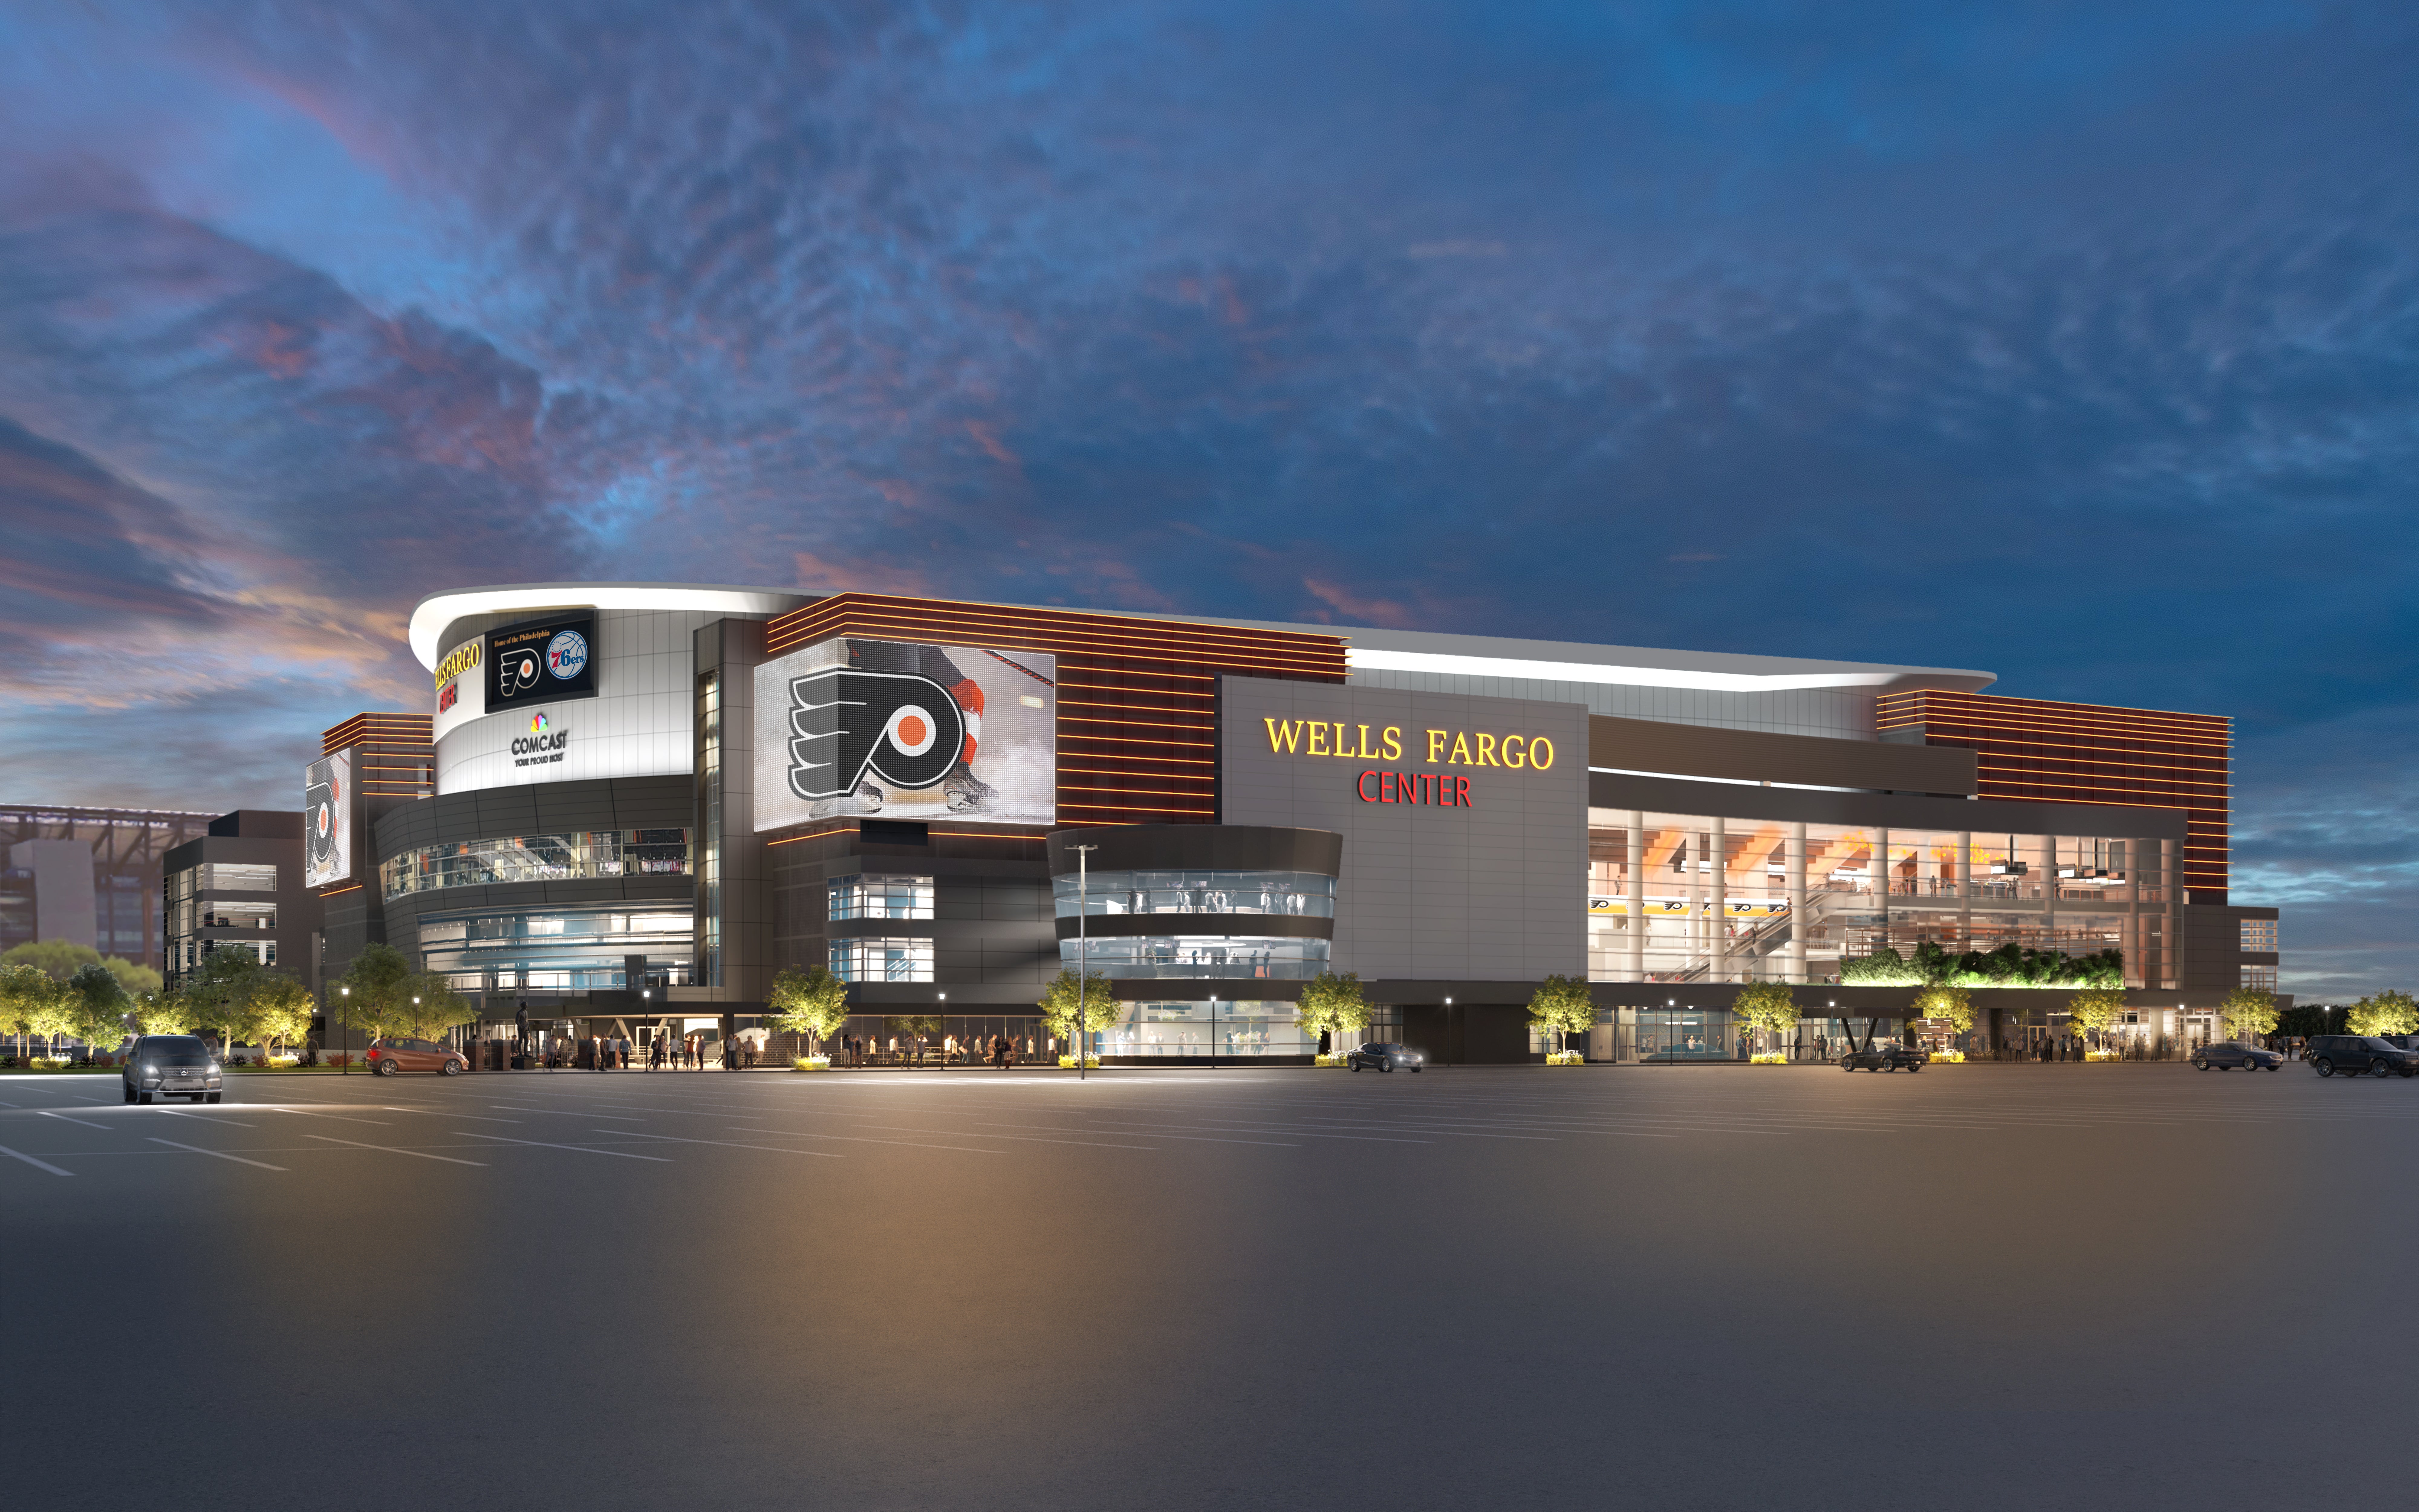 As Comcast Spectacor and the Flyers near completion of transforming Wells  Fargo Center upgrades, HBSE's Sixers are considering a long-term plan for  their own building